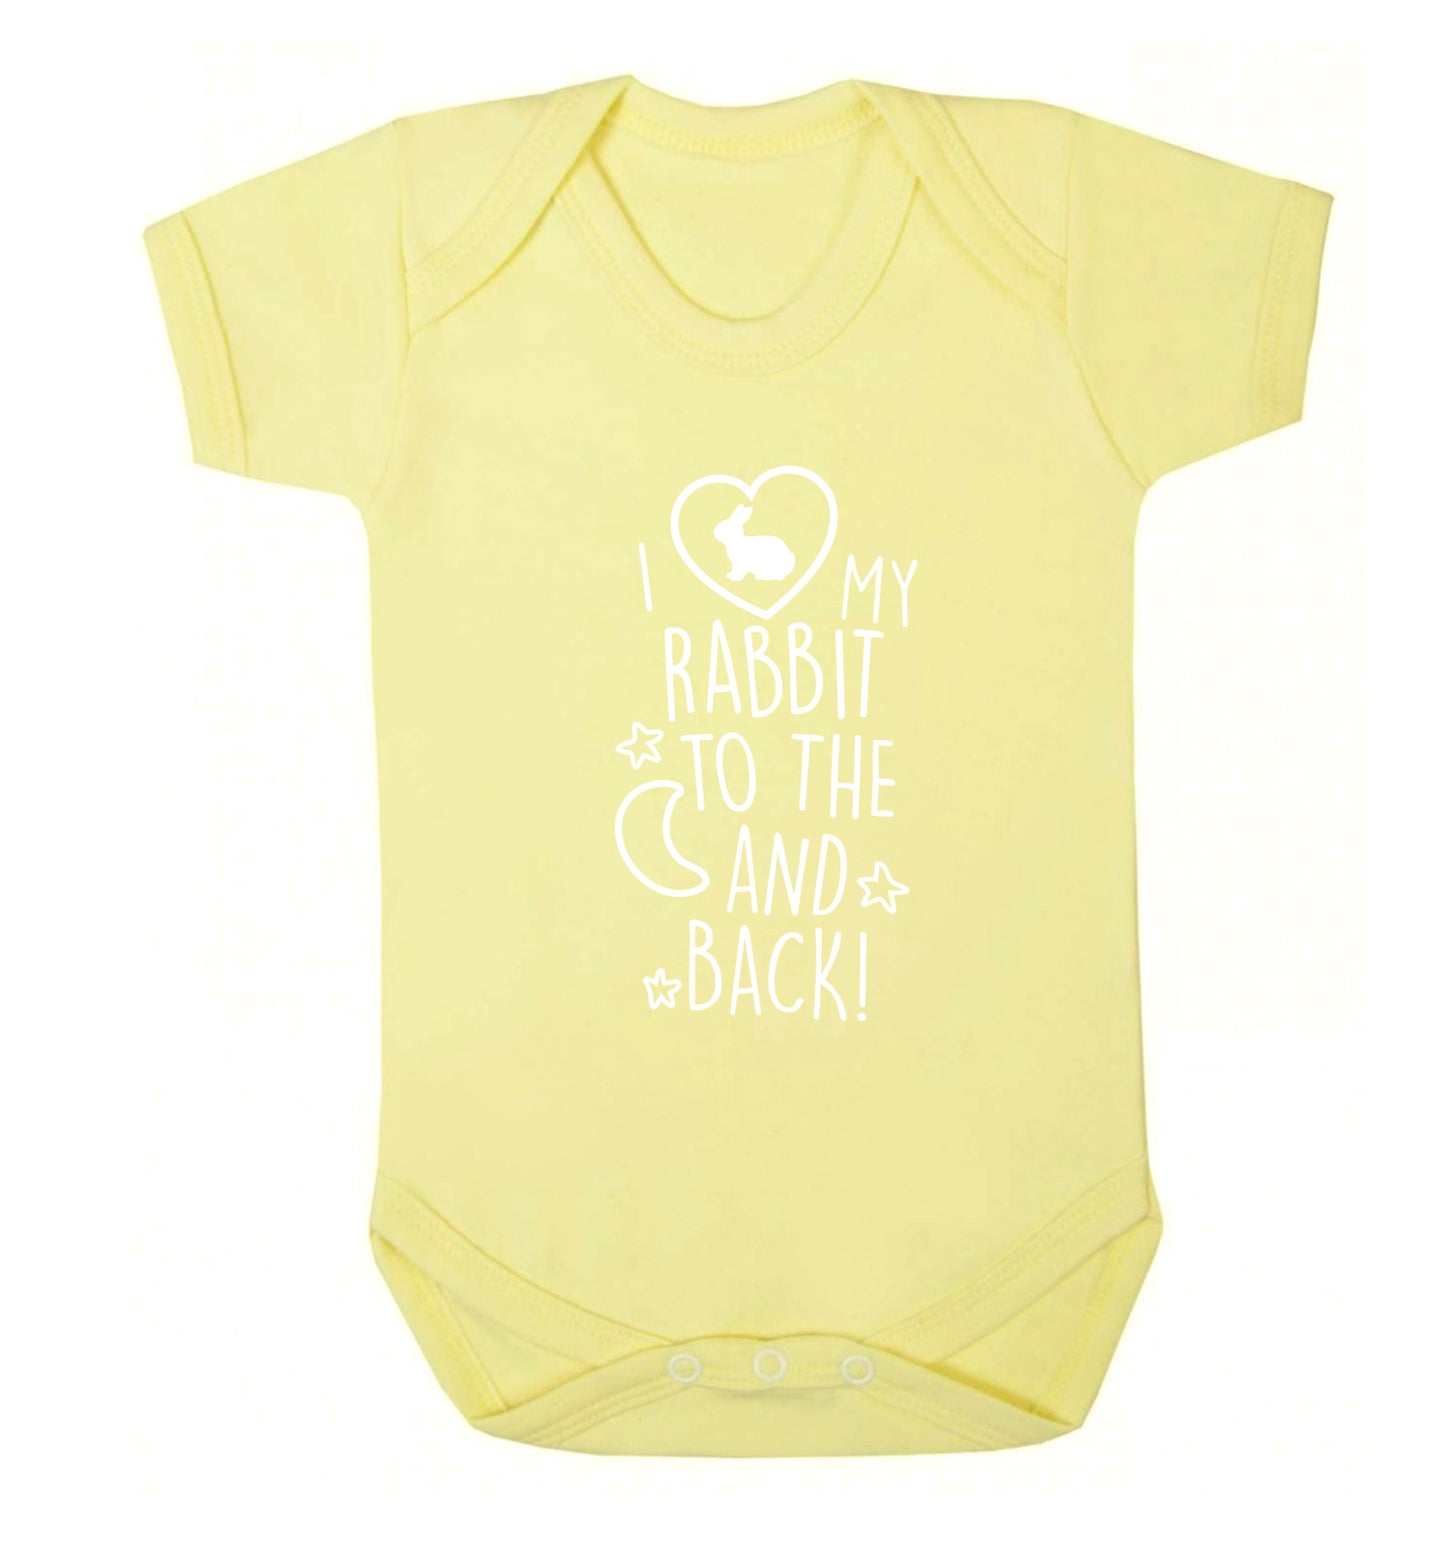 I love my rabbit to the moon and back Baby Vest pale yellow 18-24 months